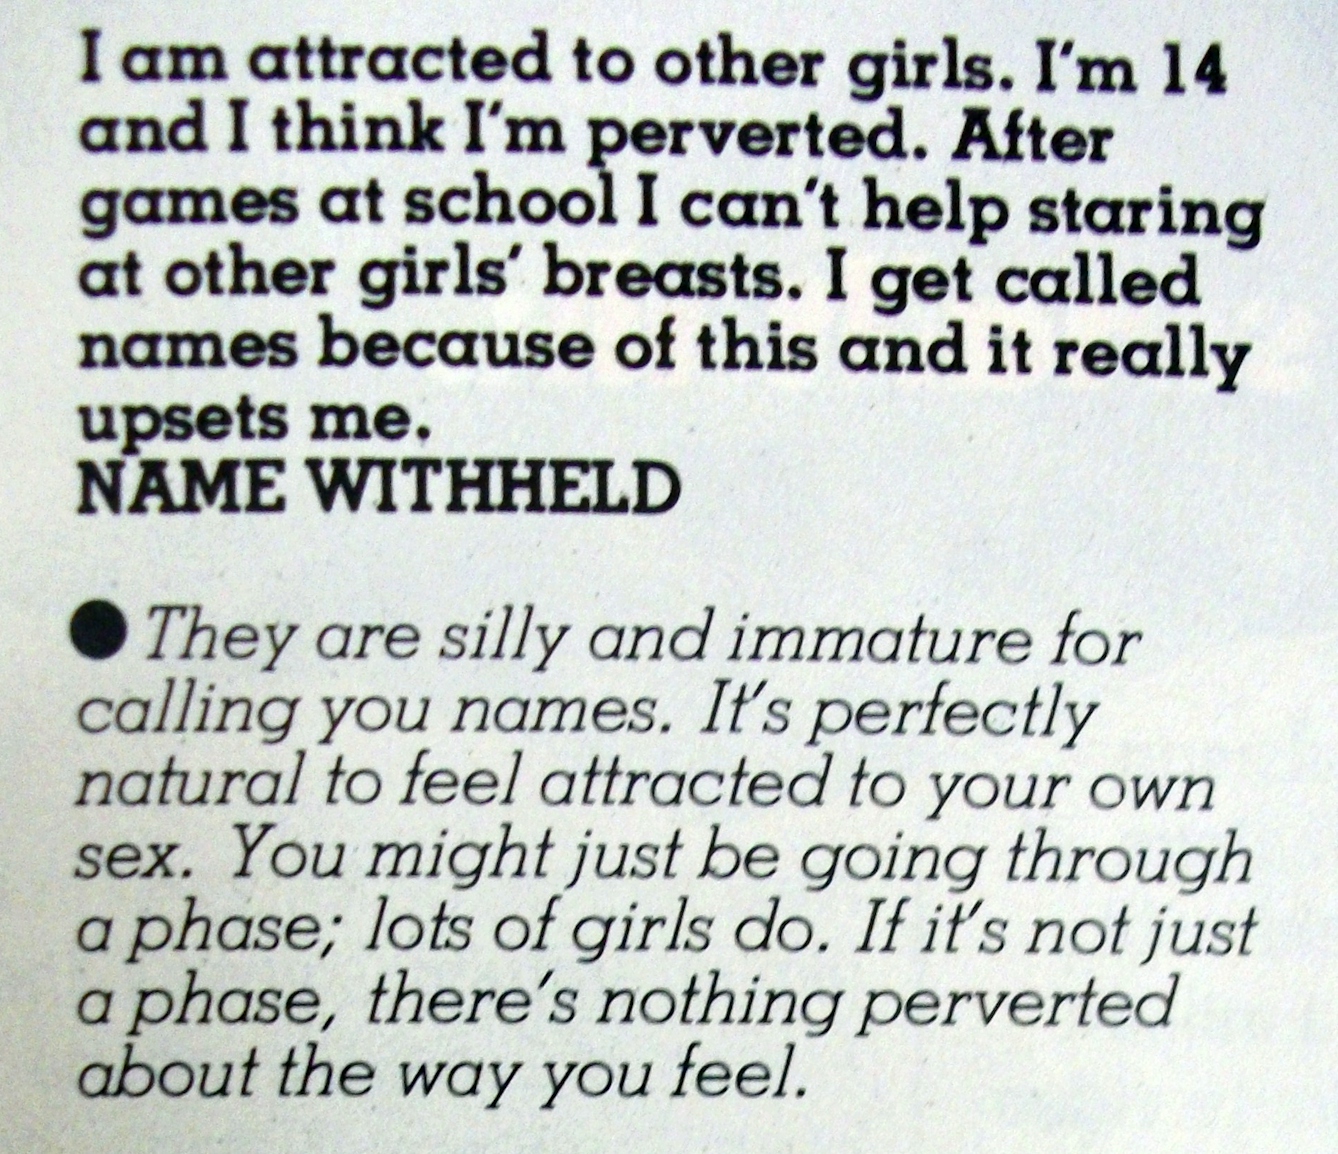 Problem page from a teen magazine with black and white text from "Name withheld" writing that they are worried that they are 'perverted' because they like other girls at school. The columnist responds that 'It's perfectly natural to feel attracted to your own sex.'